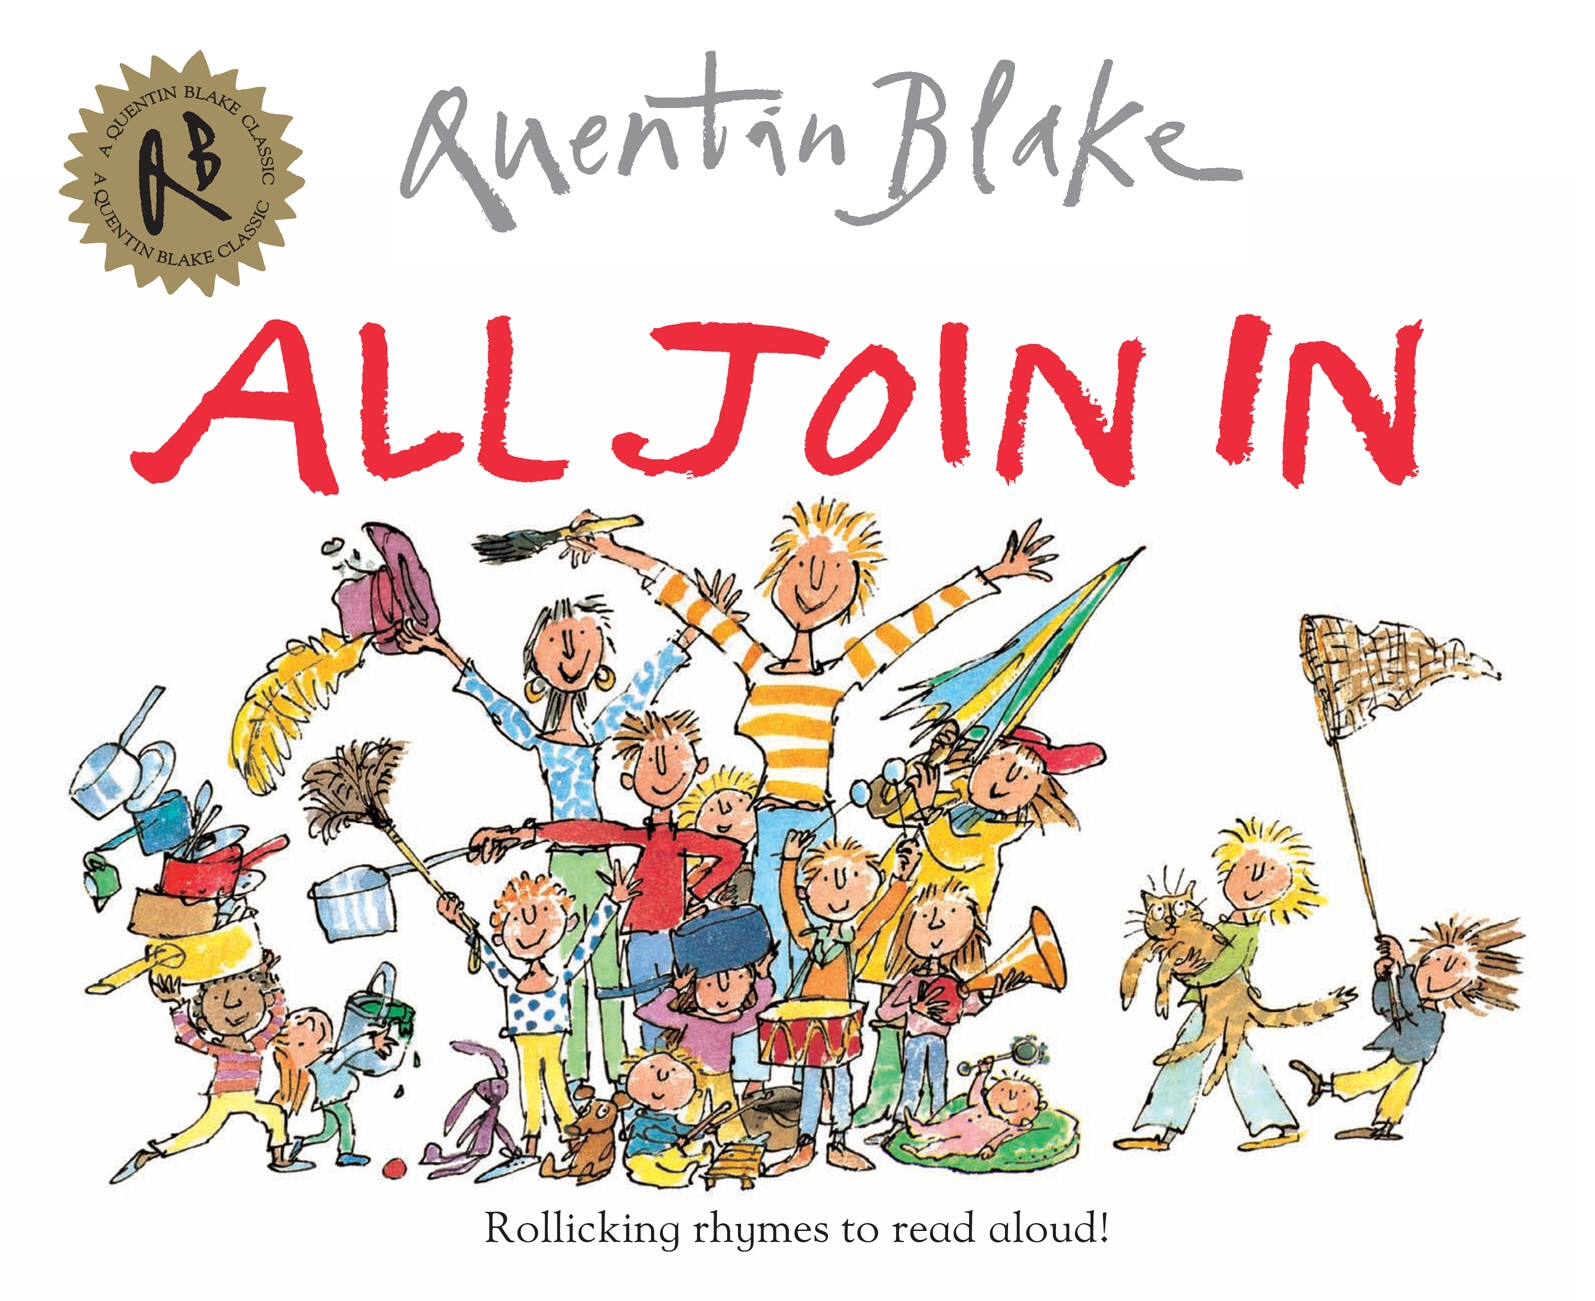 Book “All Join In” by Quentin Blake — February 20, 1992